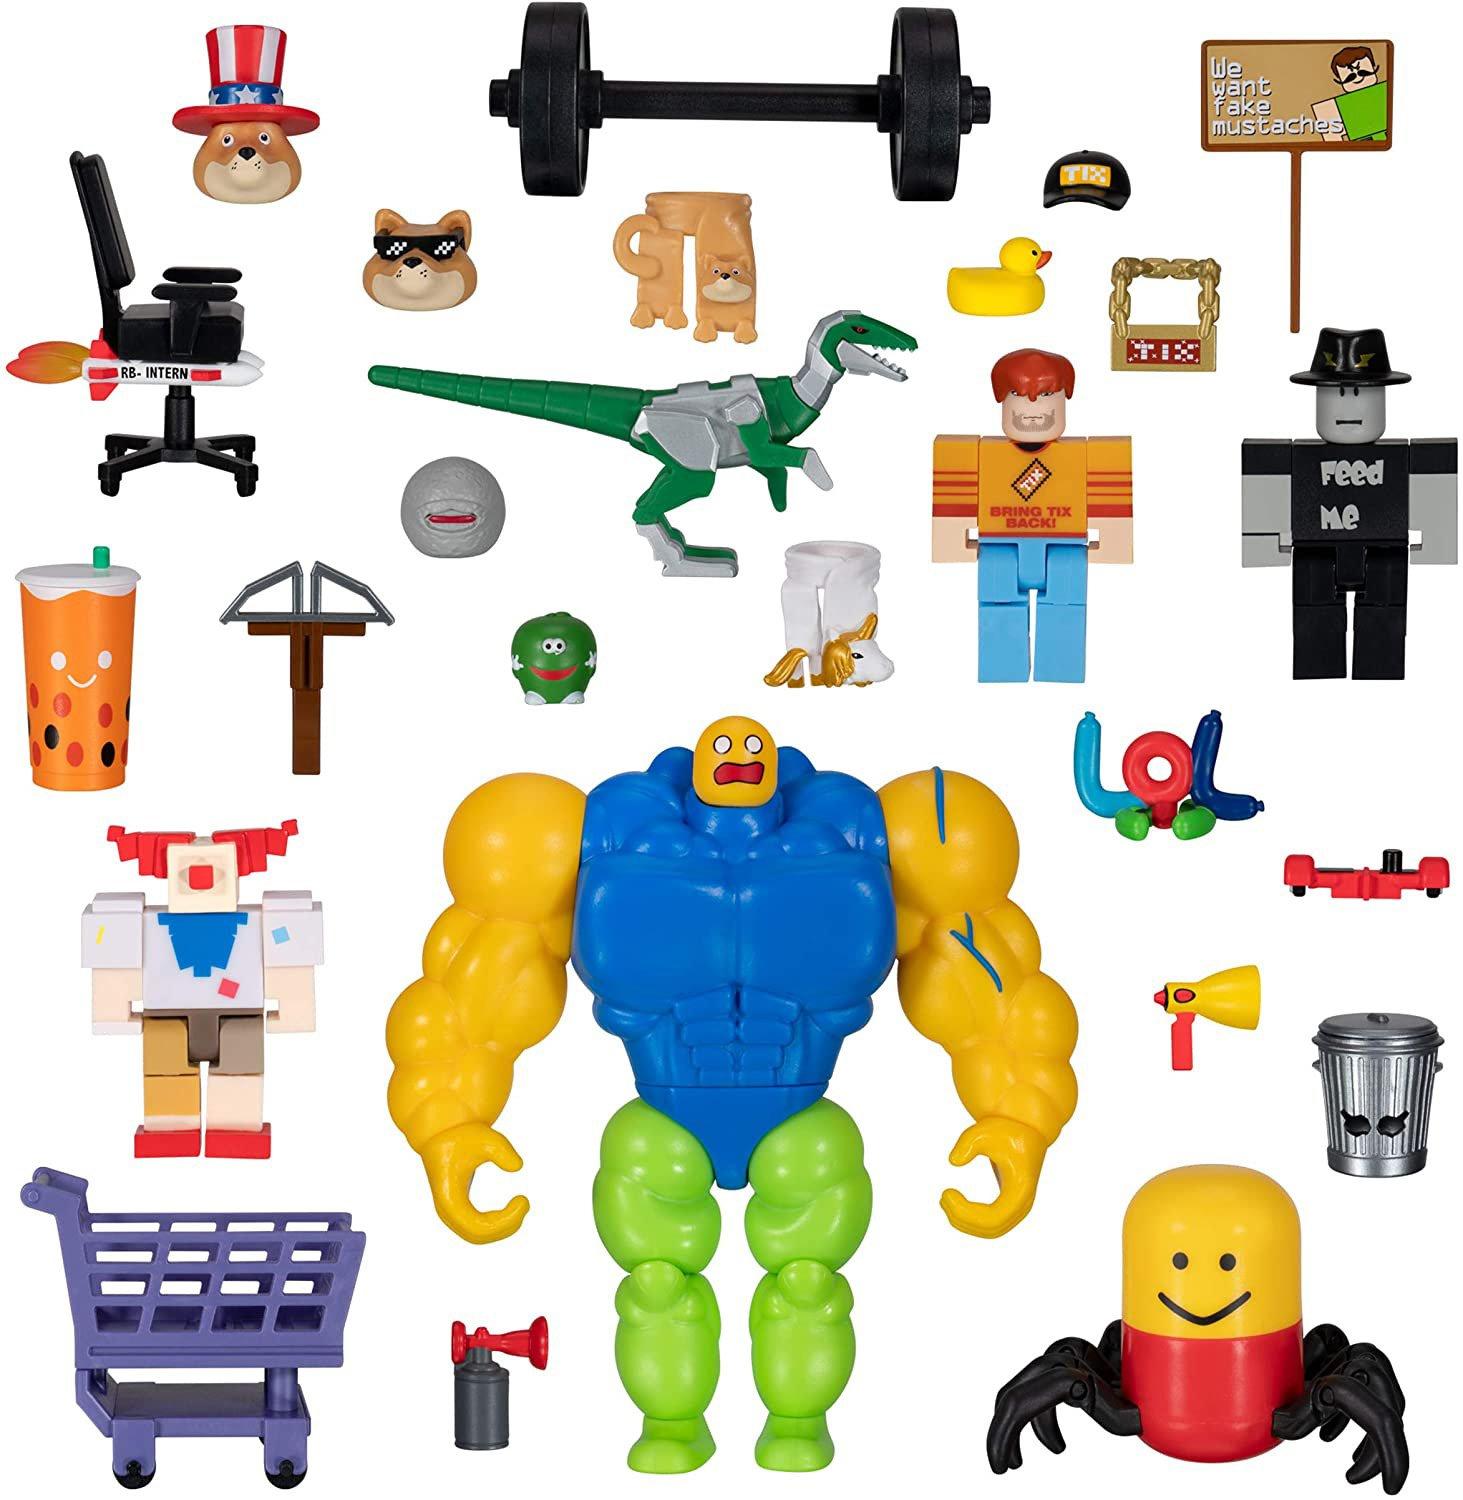 Roblox Action Collection Meme Pack Playset Includes Exclusive Virtual Item Gamestop - roblox xbox 360 gamestop